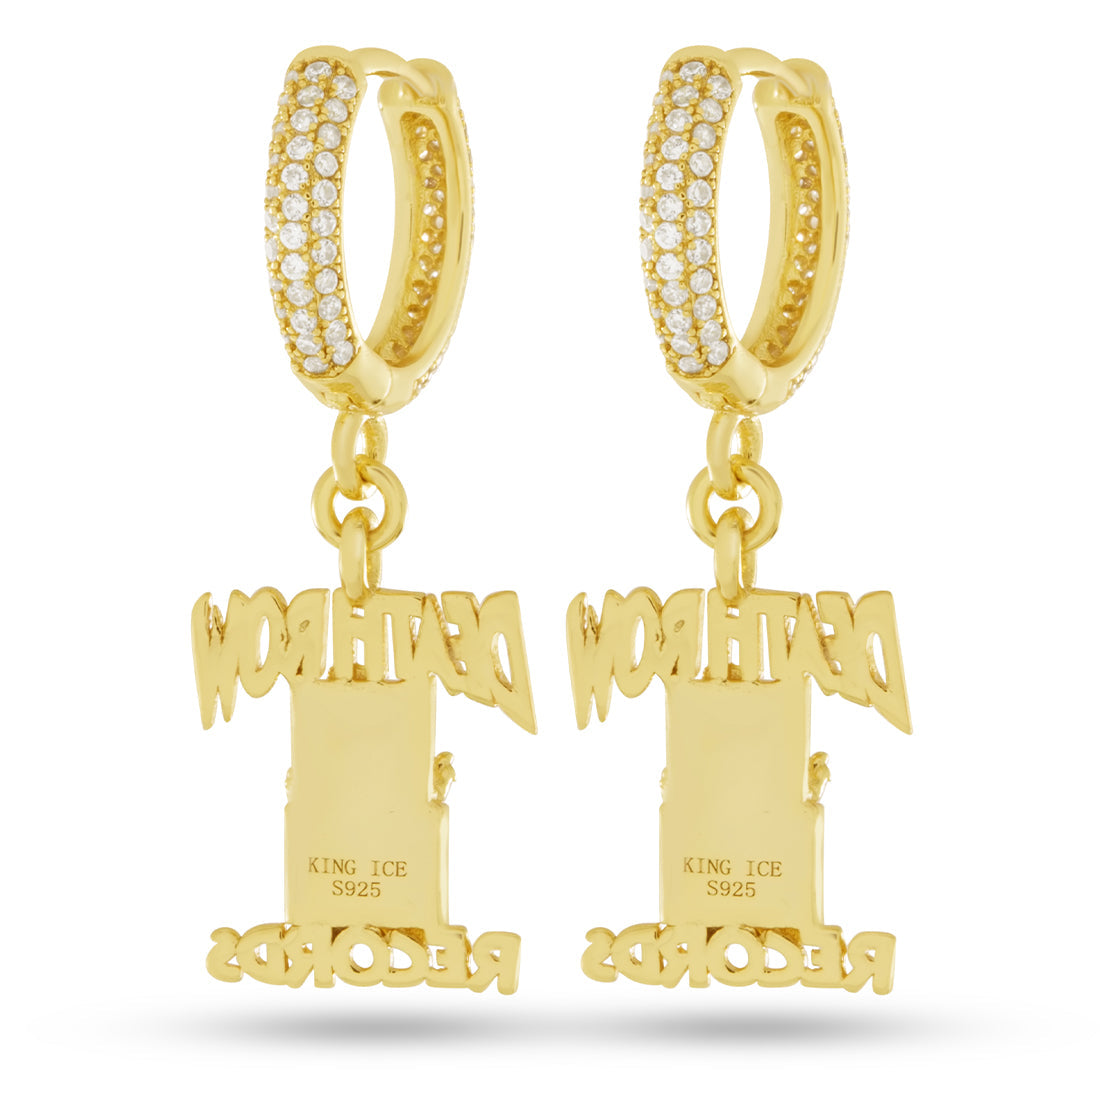 Death Row Records x King Ice - Hanging Logo Earrings